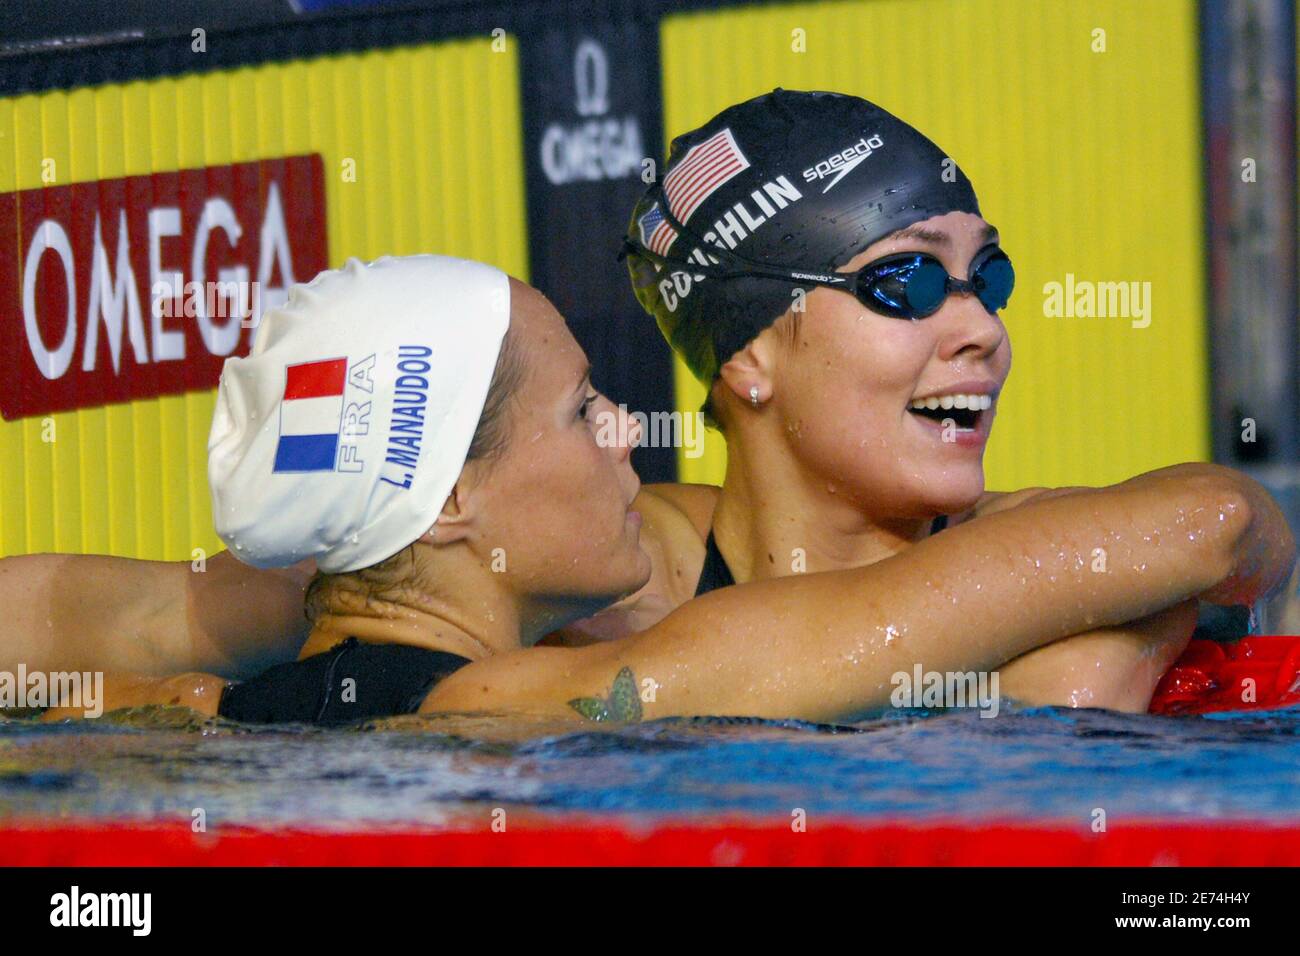 USA's Natalie Coughlin wins the gold medal and France's Laure Manaudou wins the silver on women's 100 meters backstroke during the 12th FINA World Championships, at the Rod Laver Arena, in Melbourne, Australia, on March 27, 2007. Photo by Nicolas Gouhier/Cameleon/ABACAPRESS.COM Stock Photo